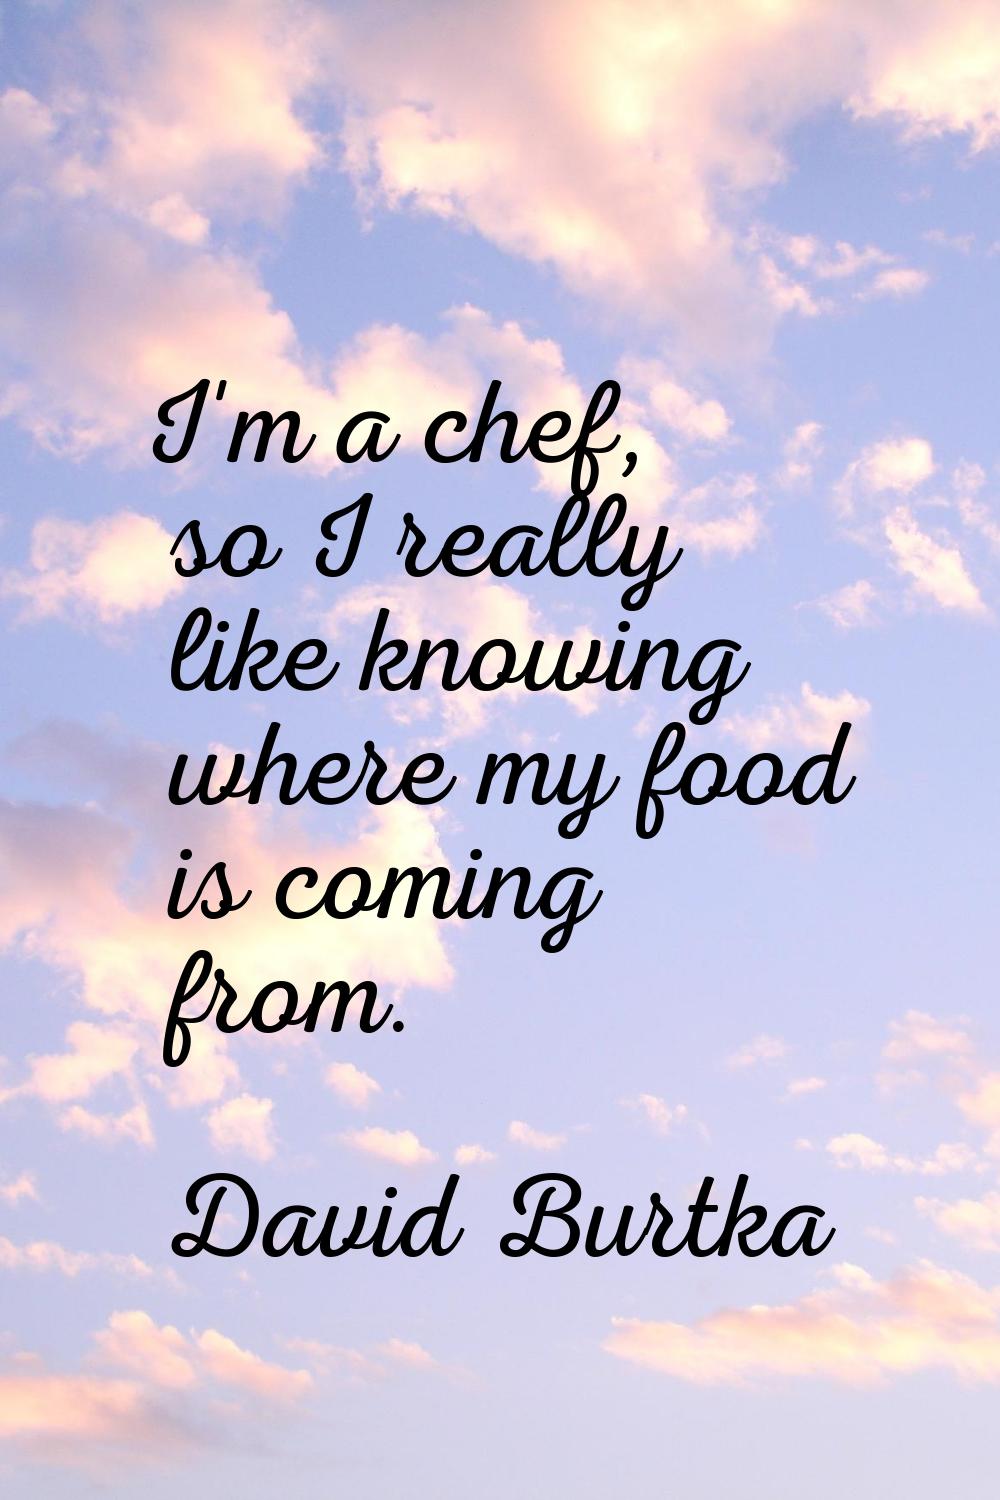 I'm a chef, so I really like knowing where my food is coming from.